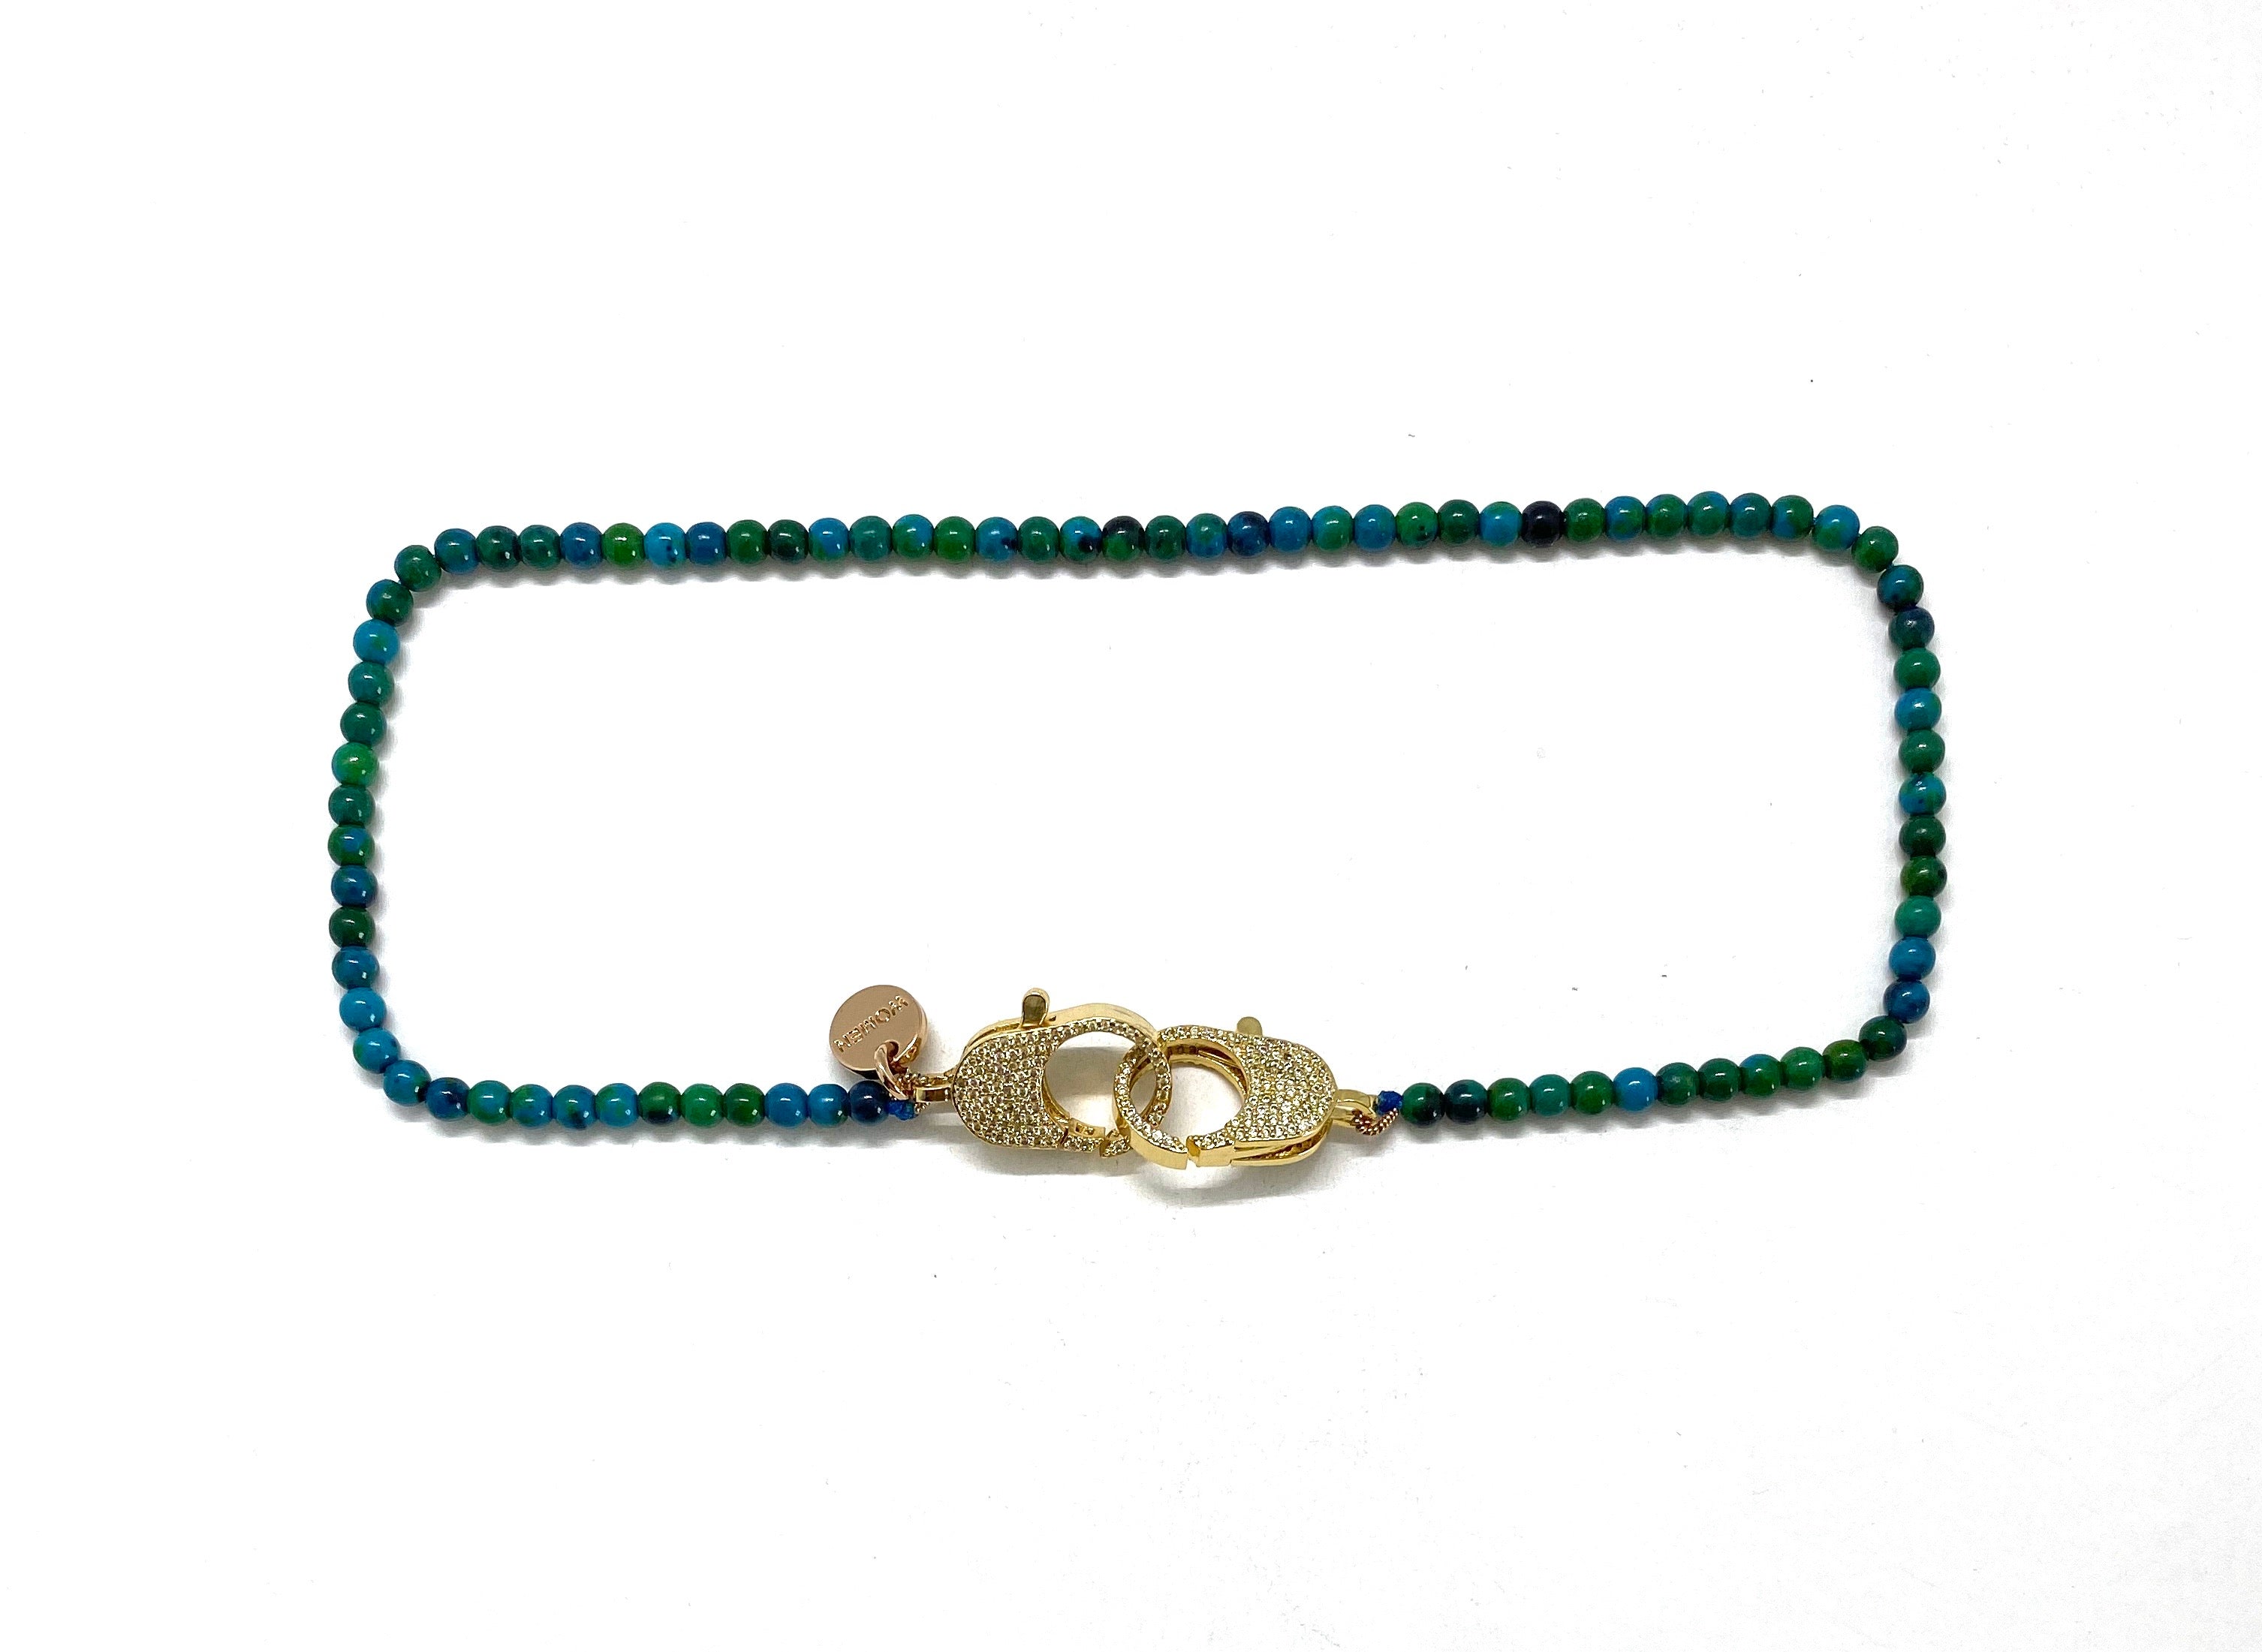 Chrysocolla Christine necklace, with gold clips